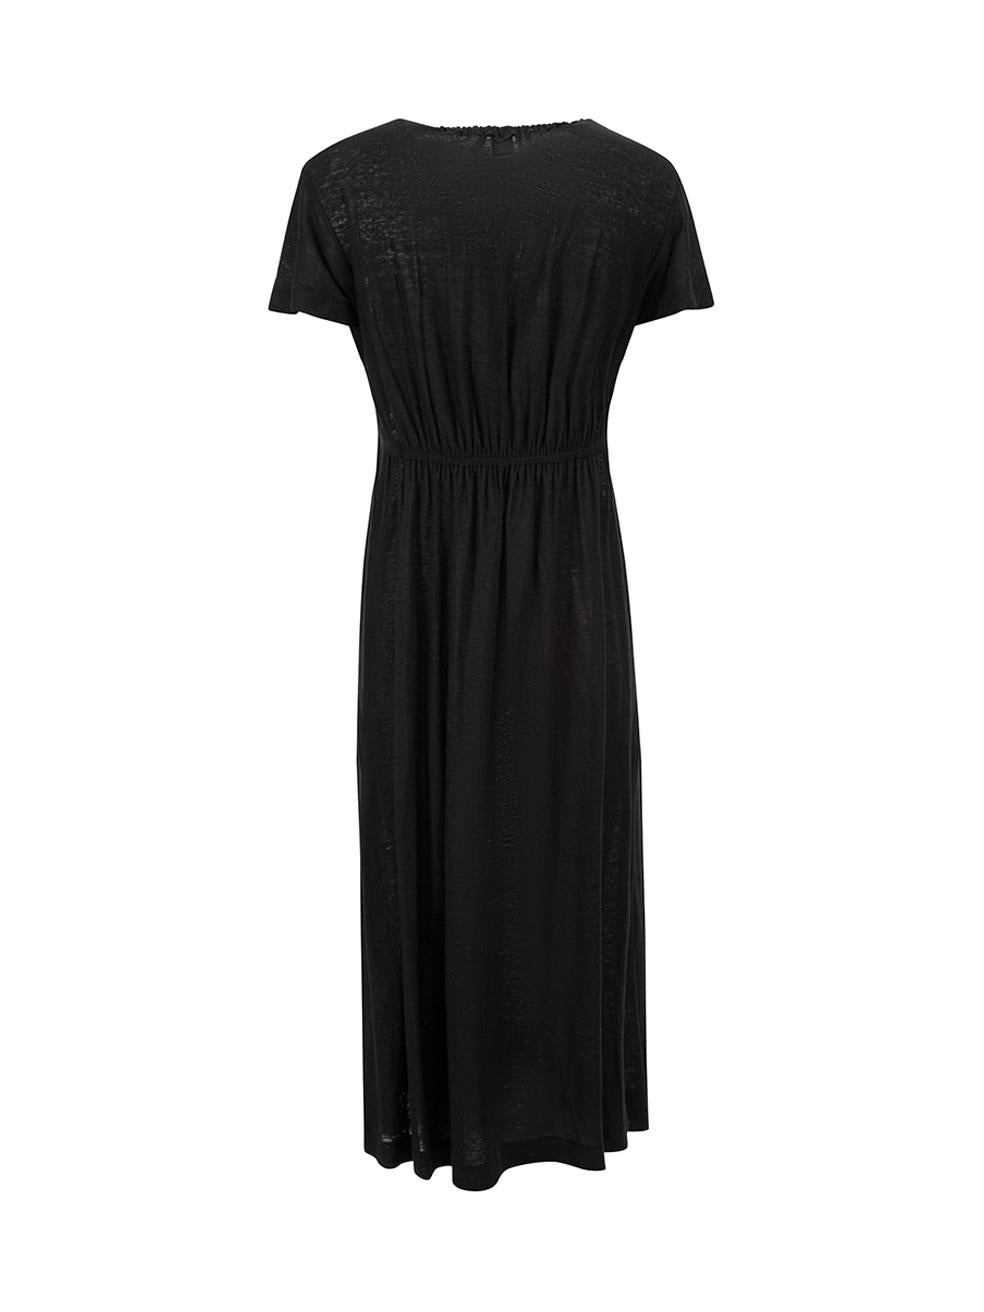 Y's Black Ruched Midi Dress Size S In Good Condition For Sale In London, GB